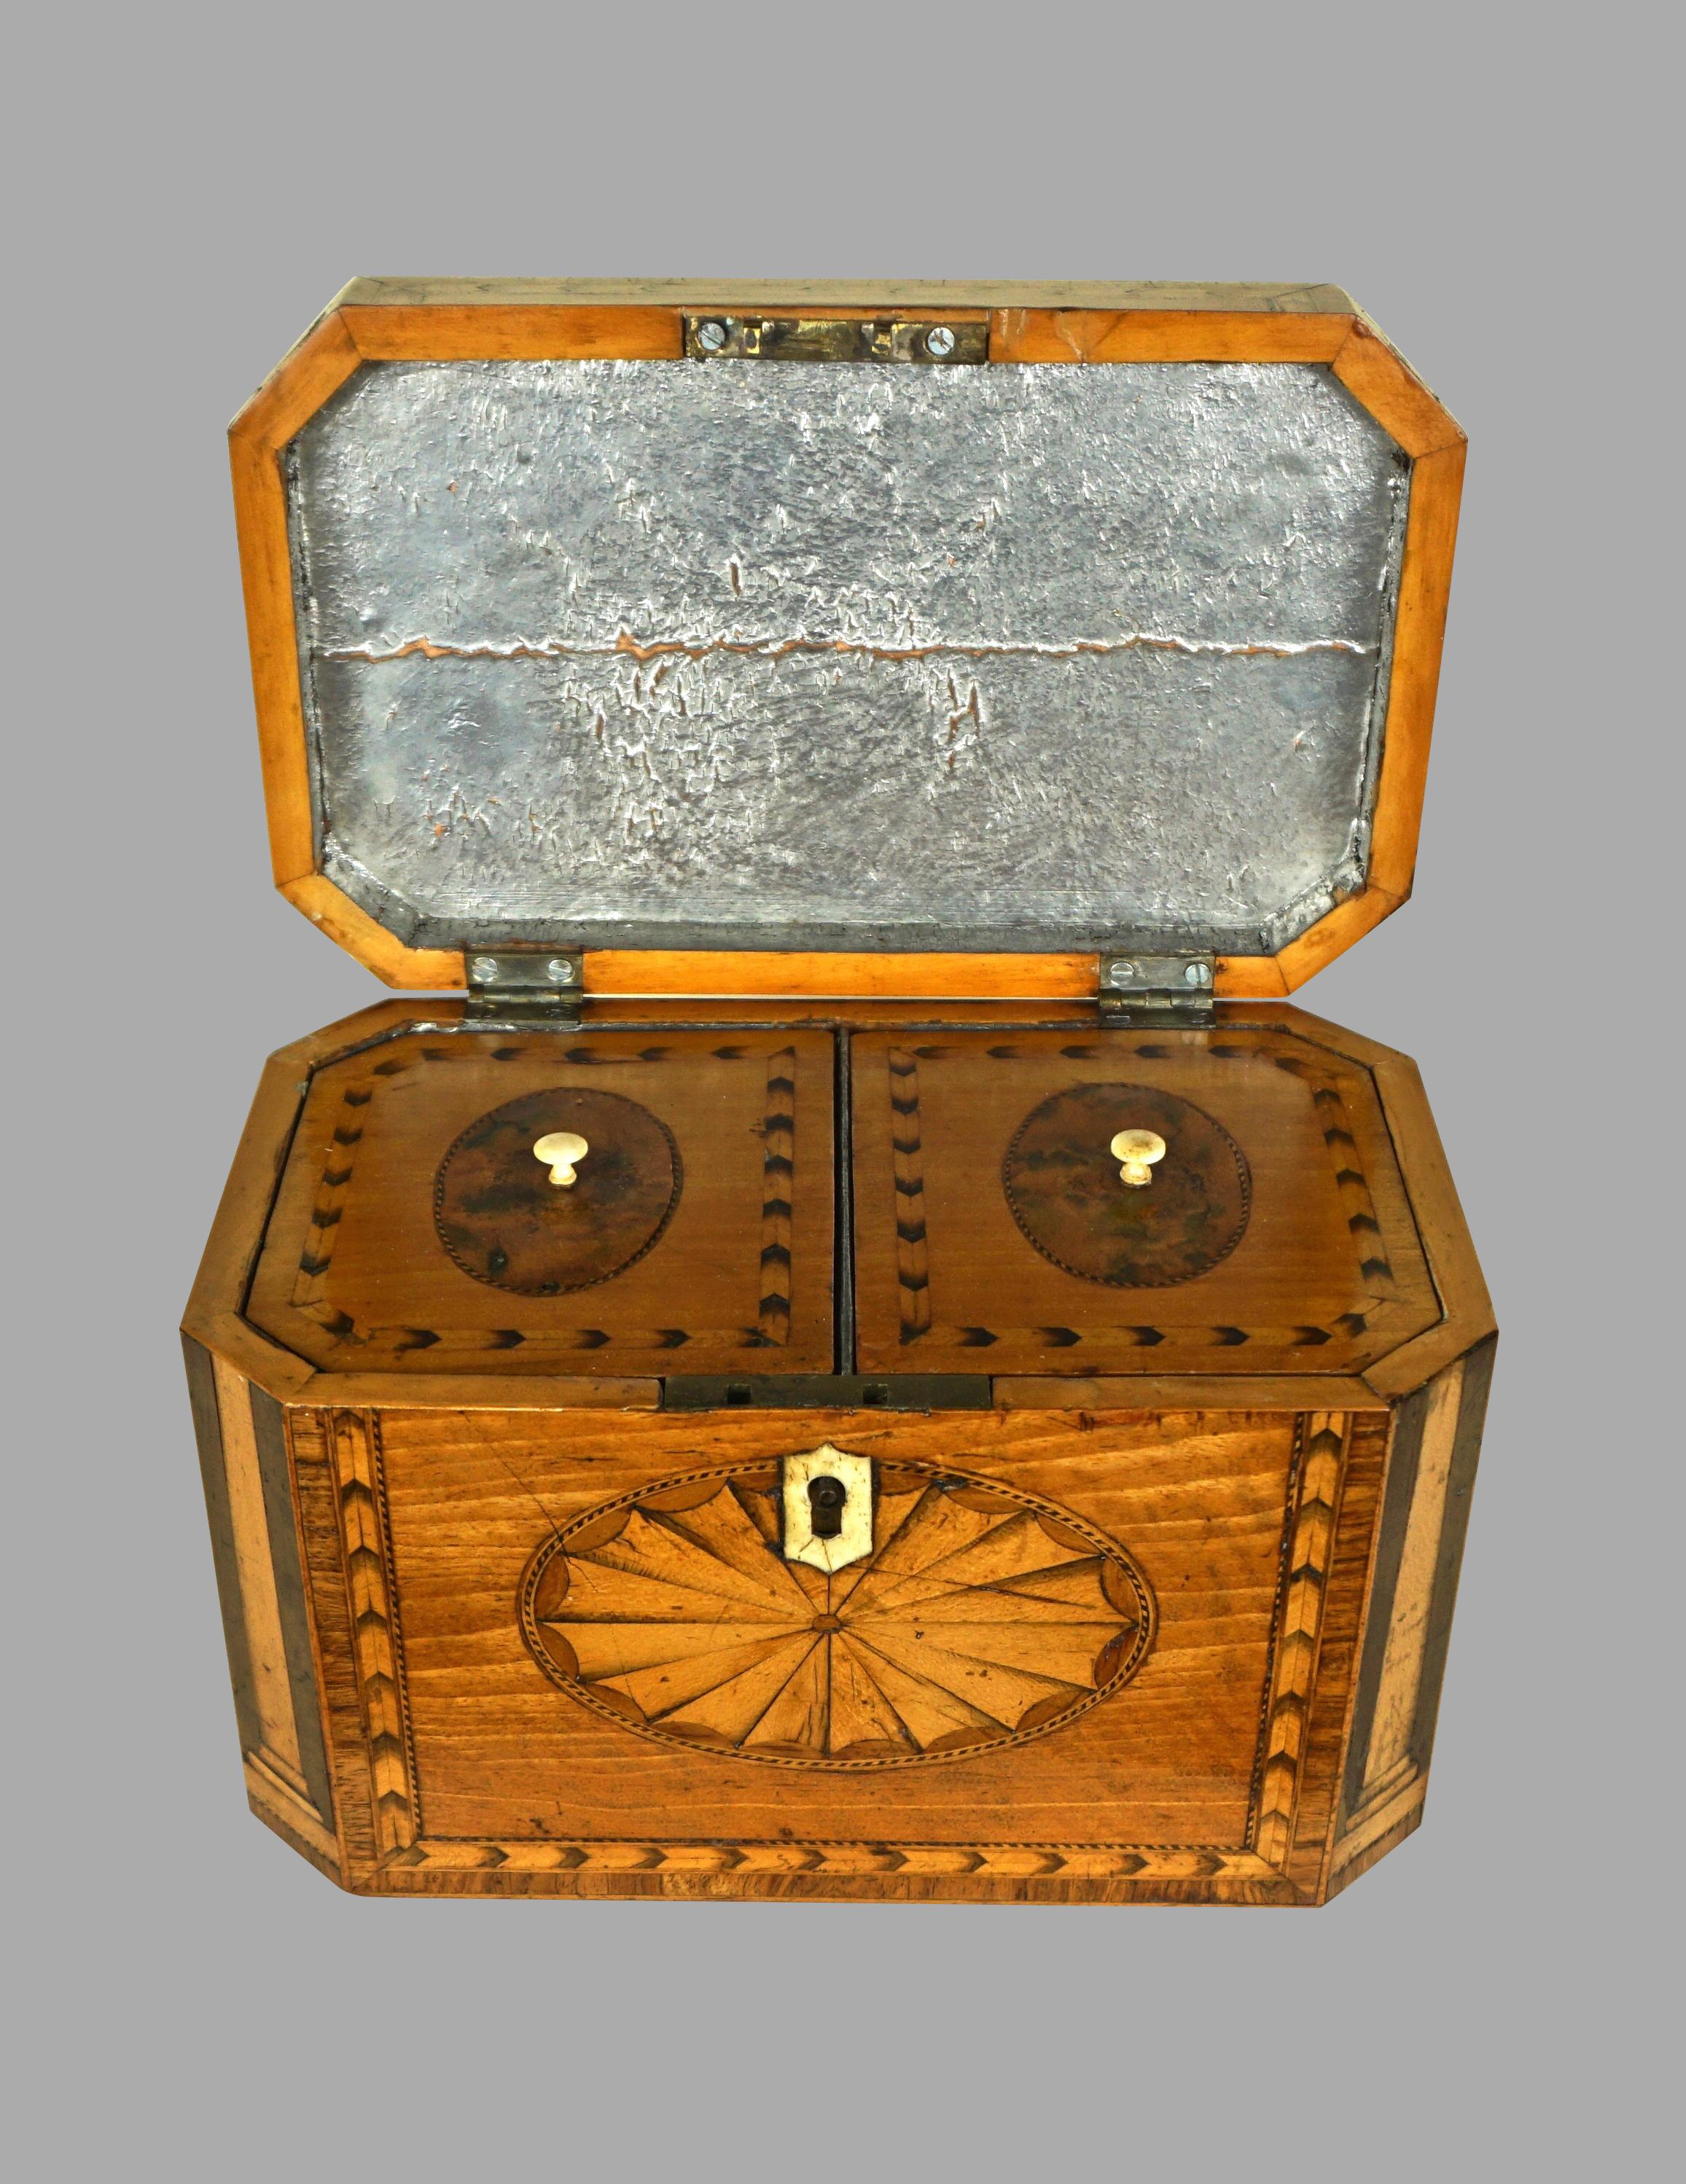 A fine quality Georgian heavily inlaid satinwood octagonal tea caddy, the top with a conch shell and fan design, the front with a shell inlay, the corners decorated with boxwood columns, the sides further inlaid with oval burled panels all with